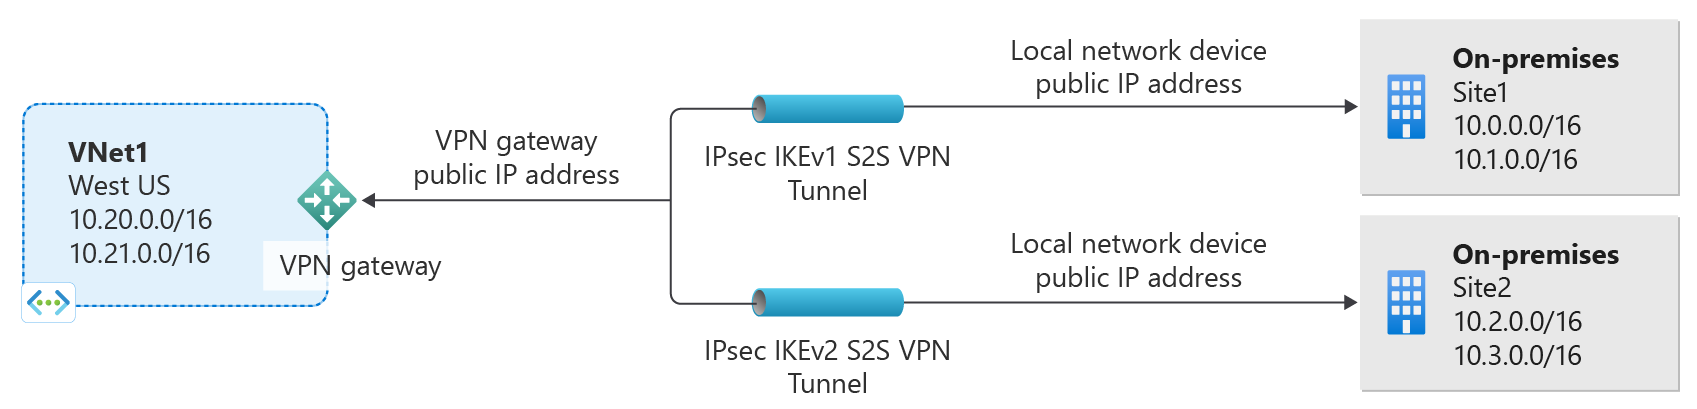 Azure VPN Gateway IKEv1 and IKEv2 connections